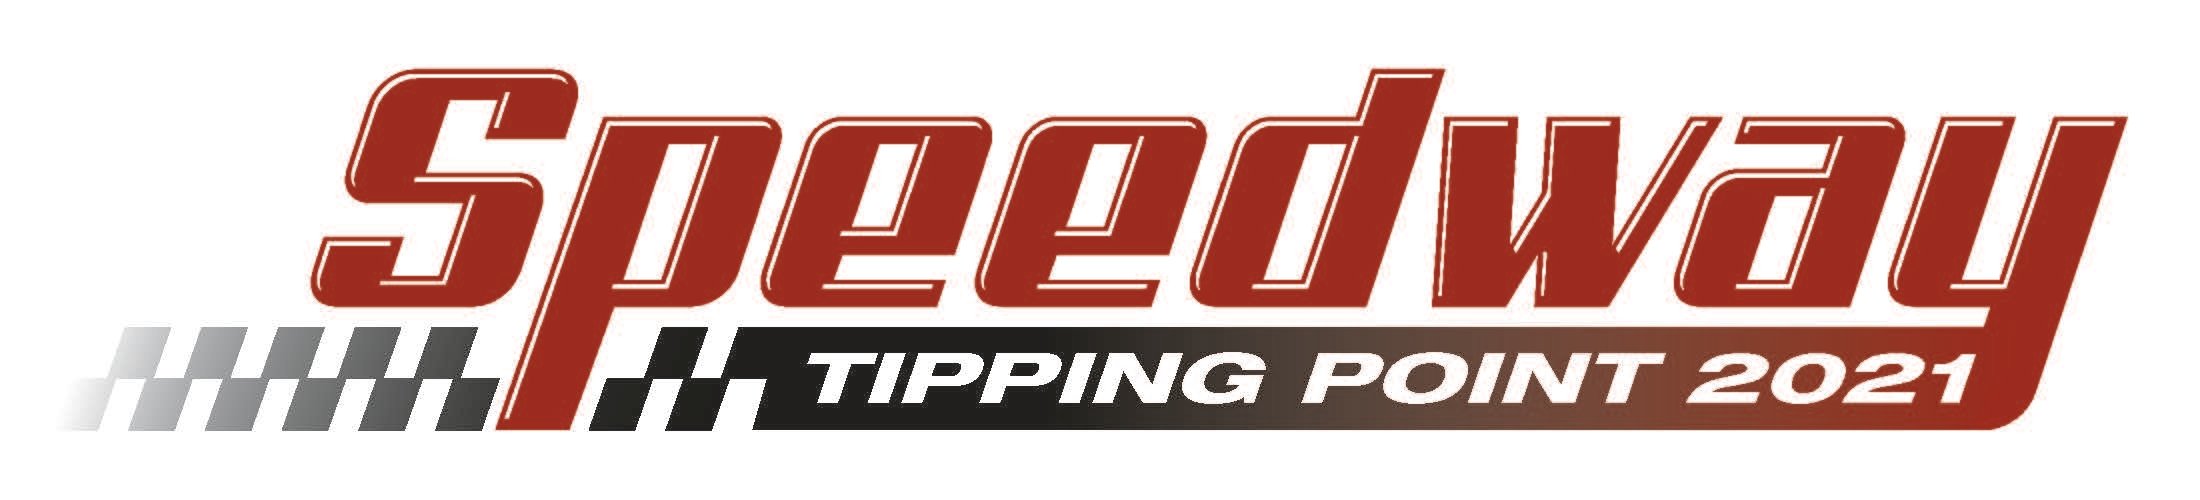 Speedway: Tipping Point (VRC Blended) - Signature Event